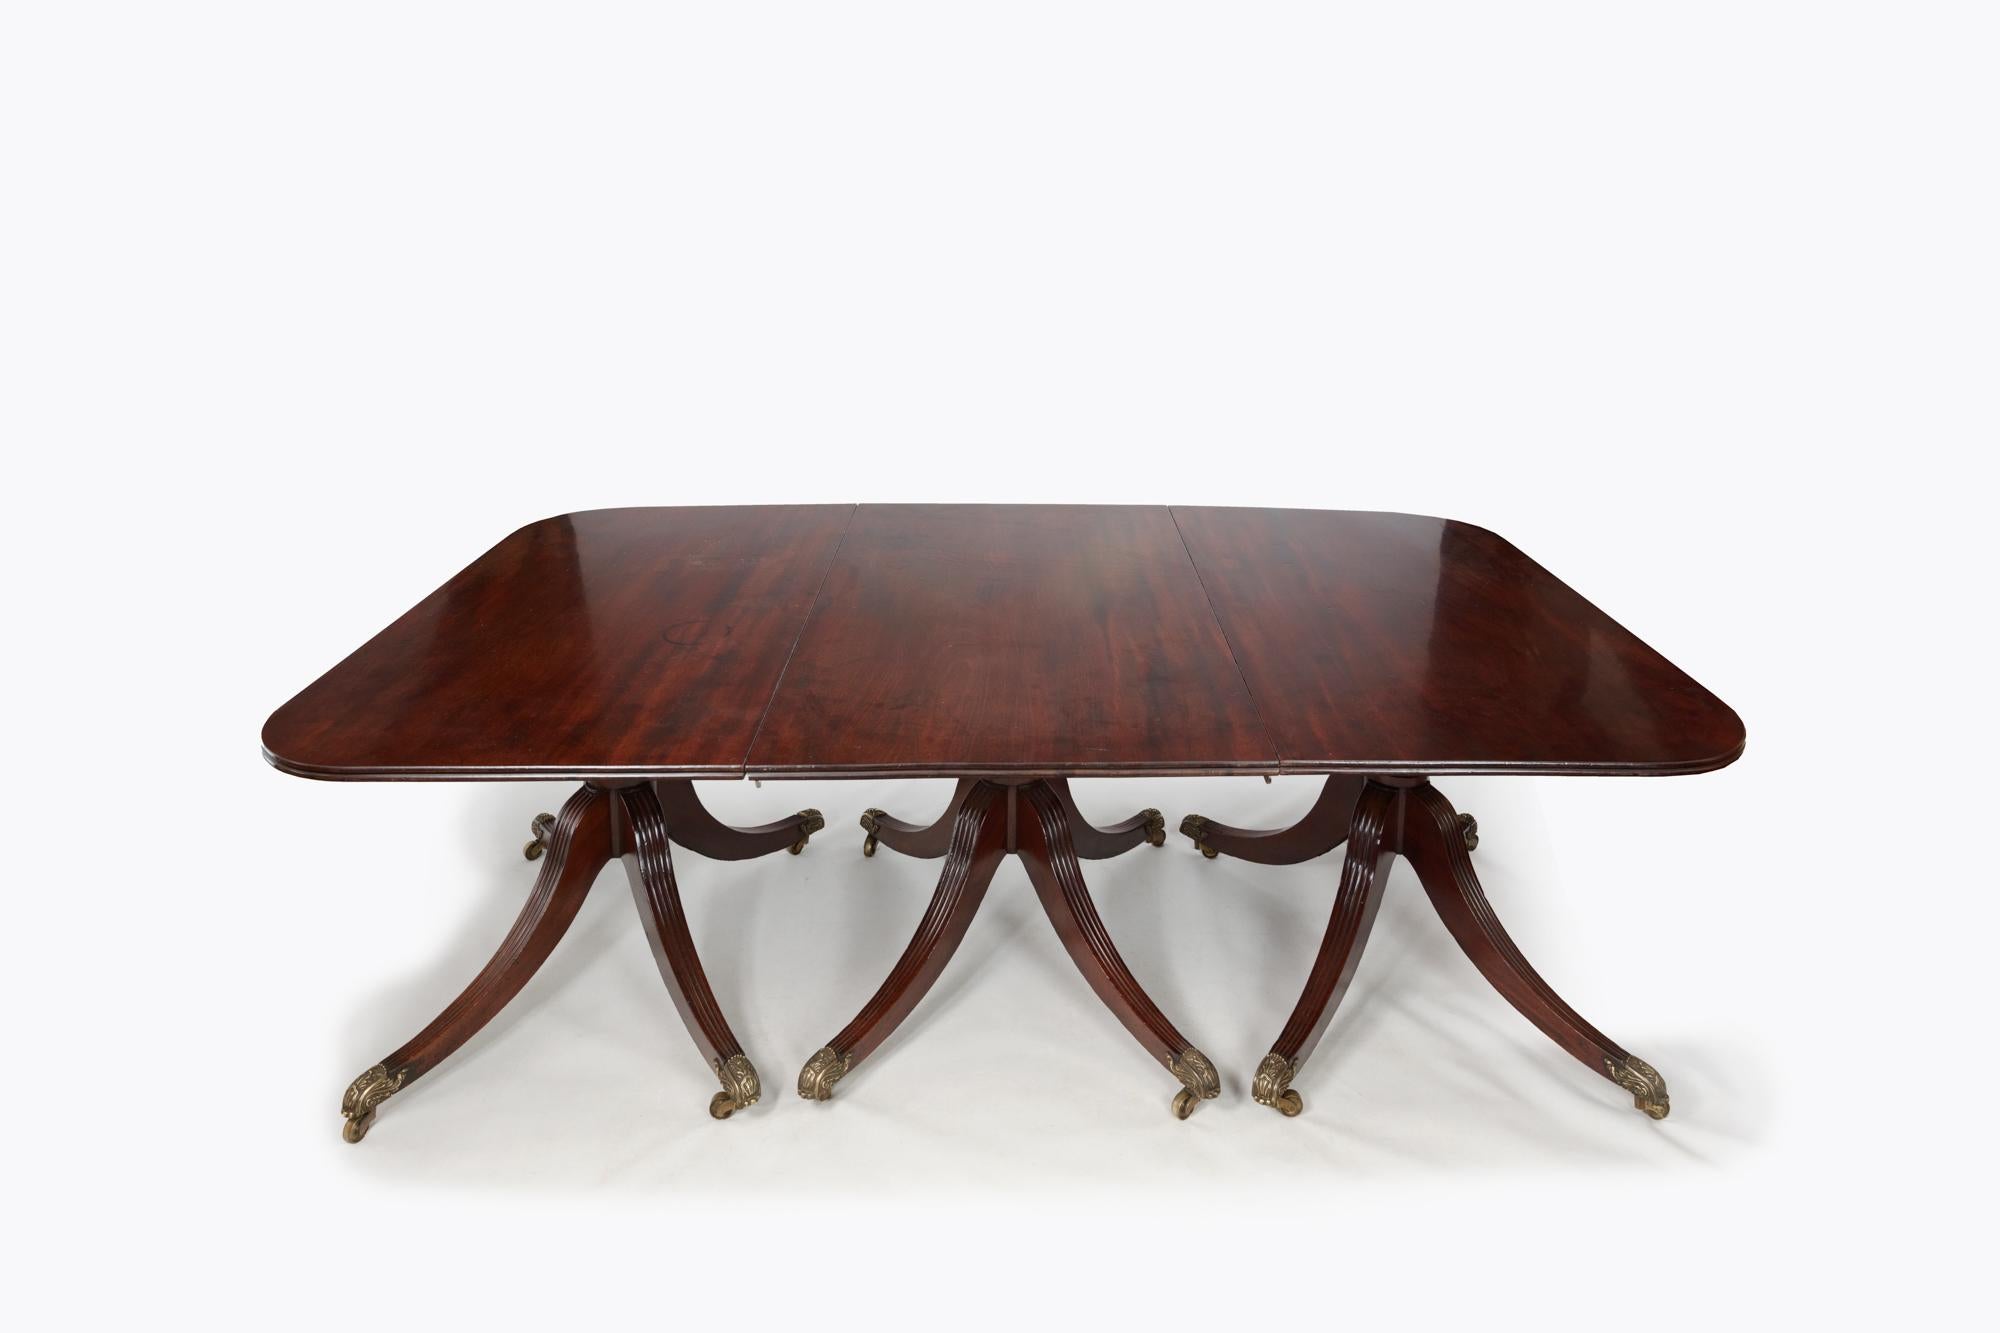 Early 19th Century English Regency dining table, of a rich and lovely grained mahogany, has a reeded edge and two center leaves, and is supported by three turned pedestal bases, each with four reeded and splayed legs, with brass caps and casters.